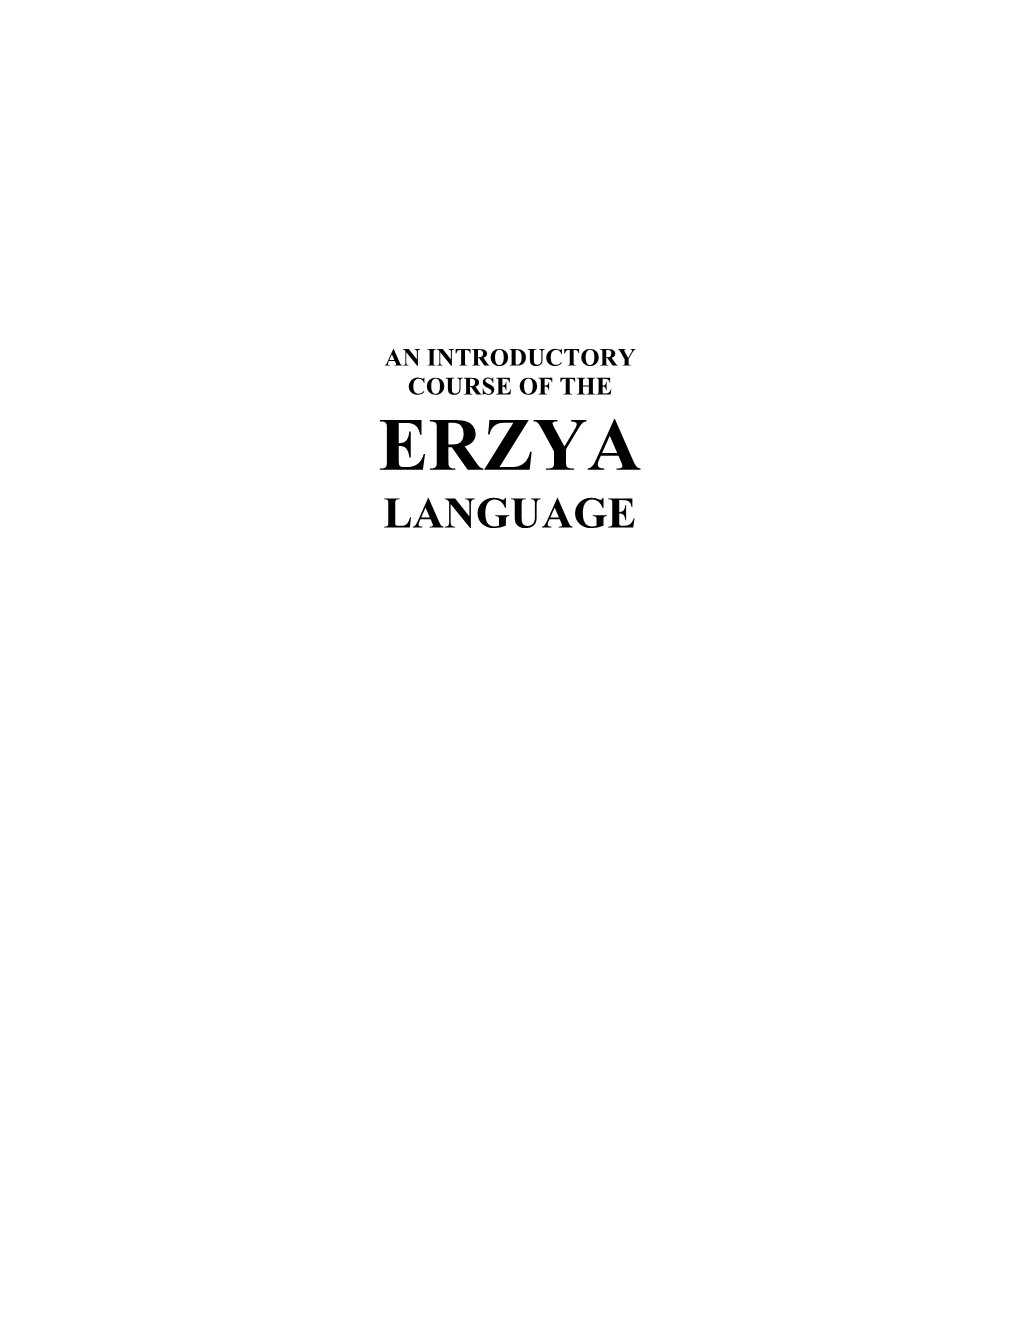 An Introductory Course of the Erzya Language.Pdf